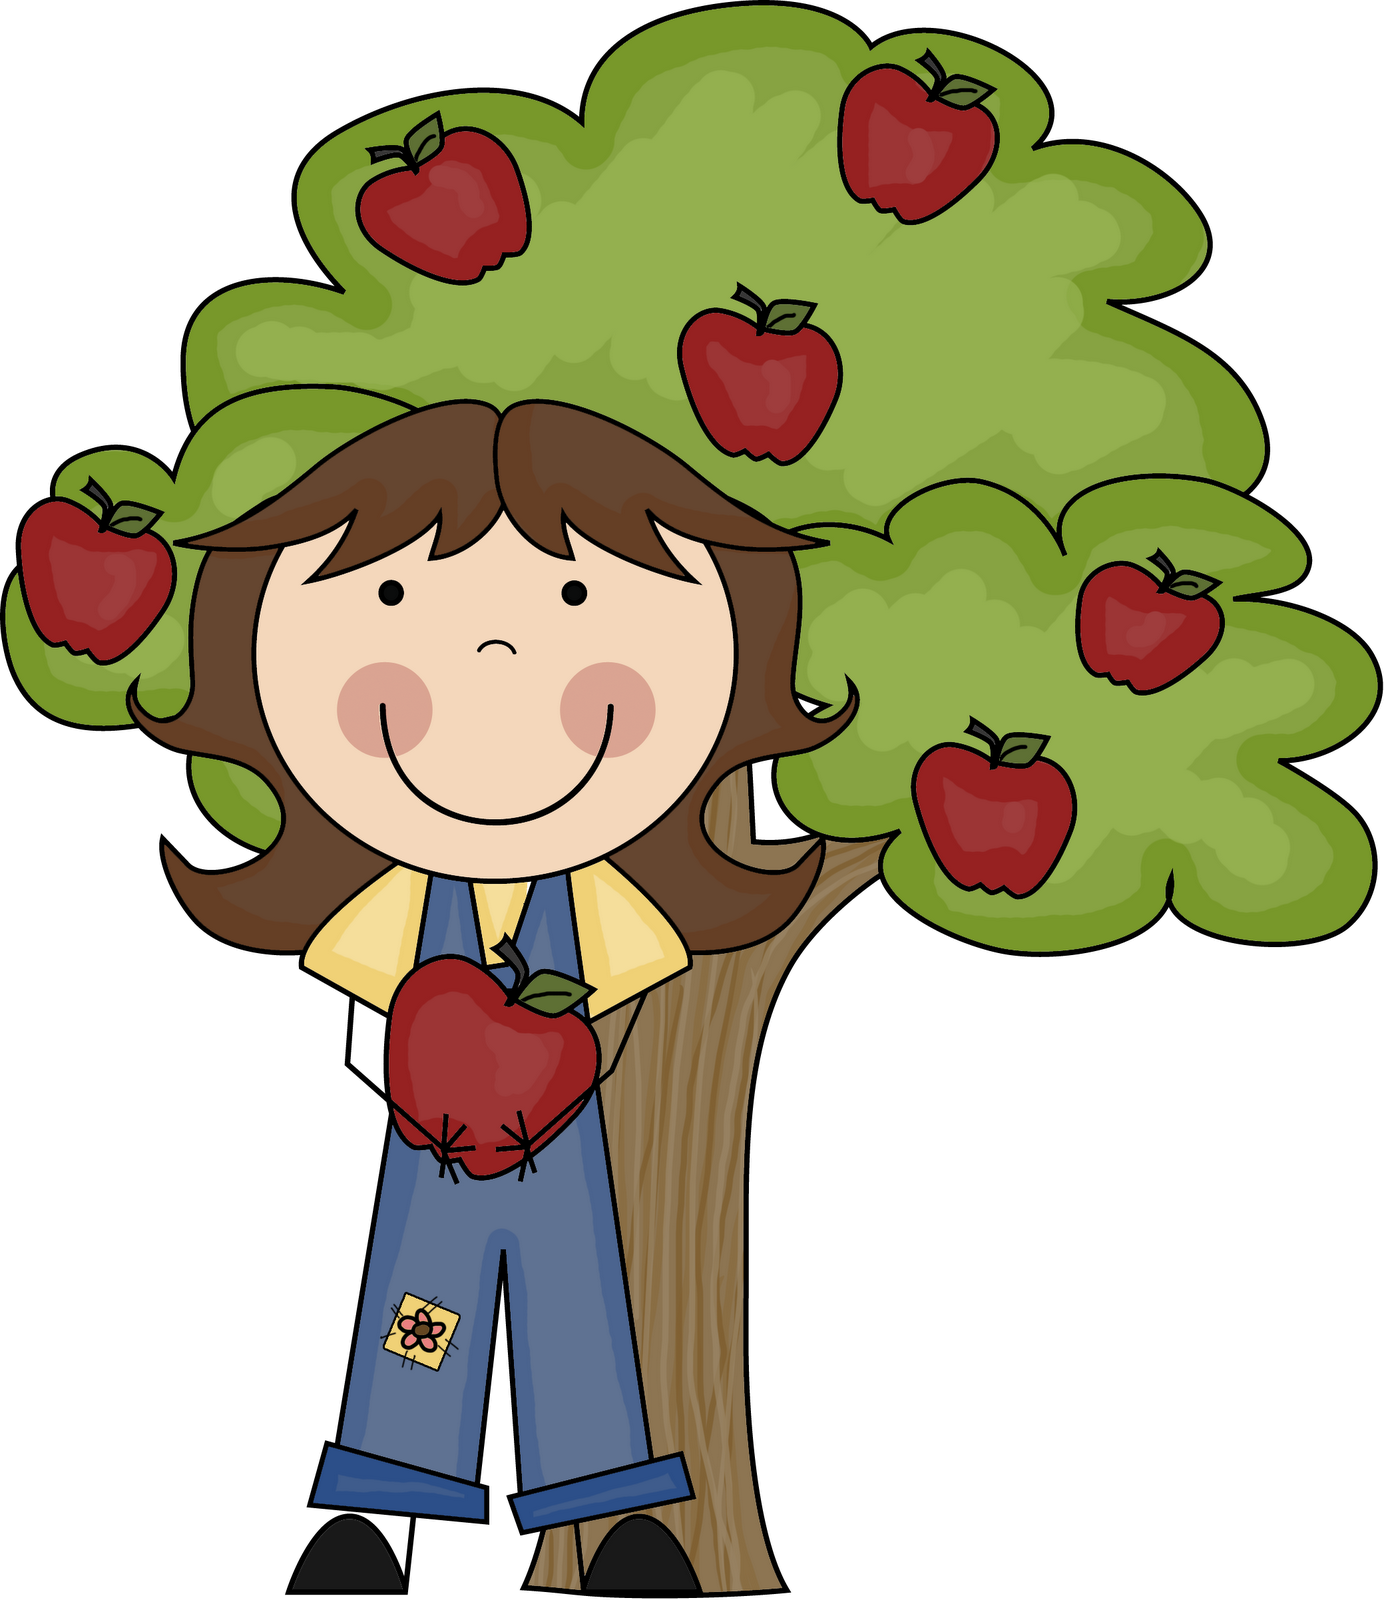 oxford reading tree clip art download - photo #30